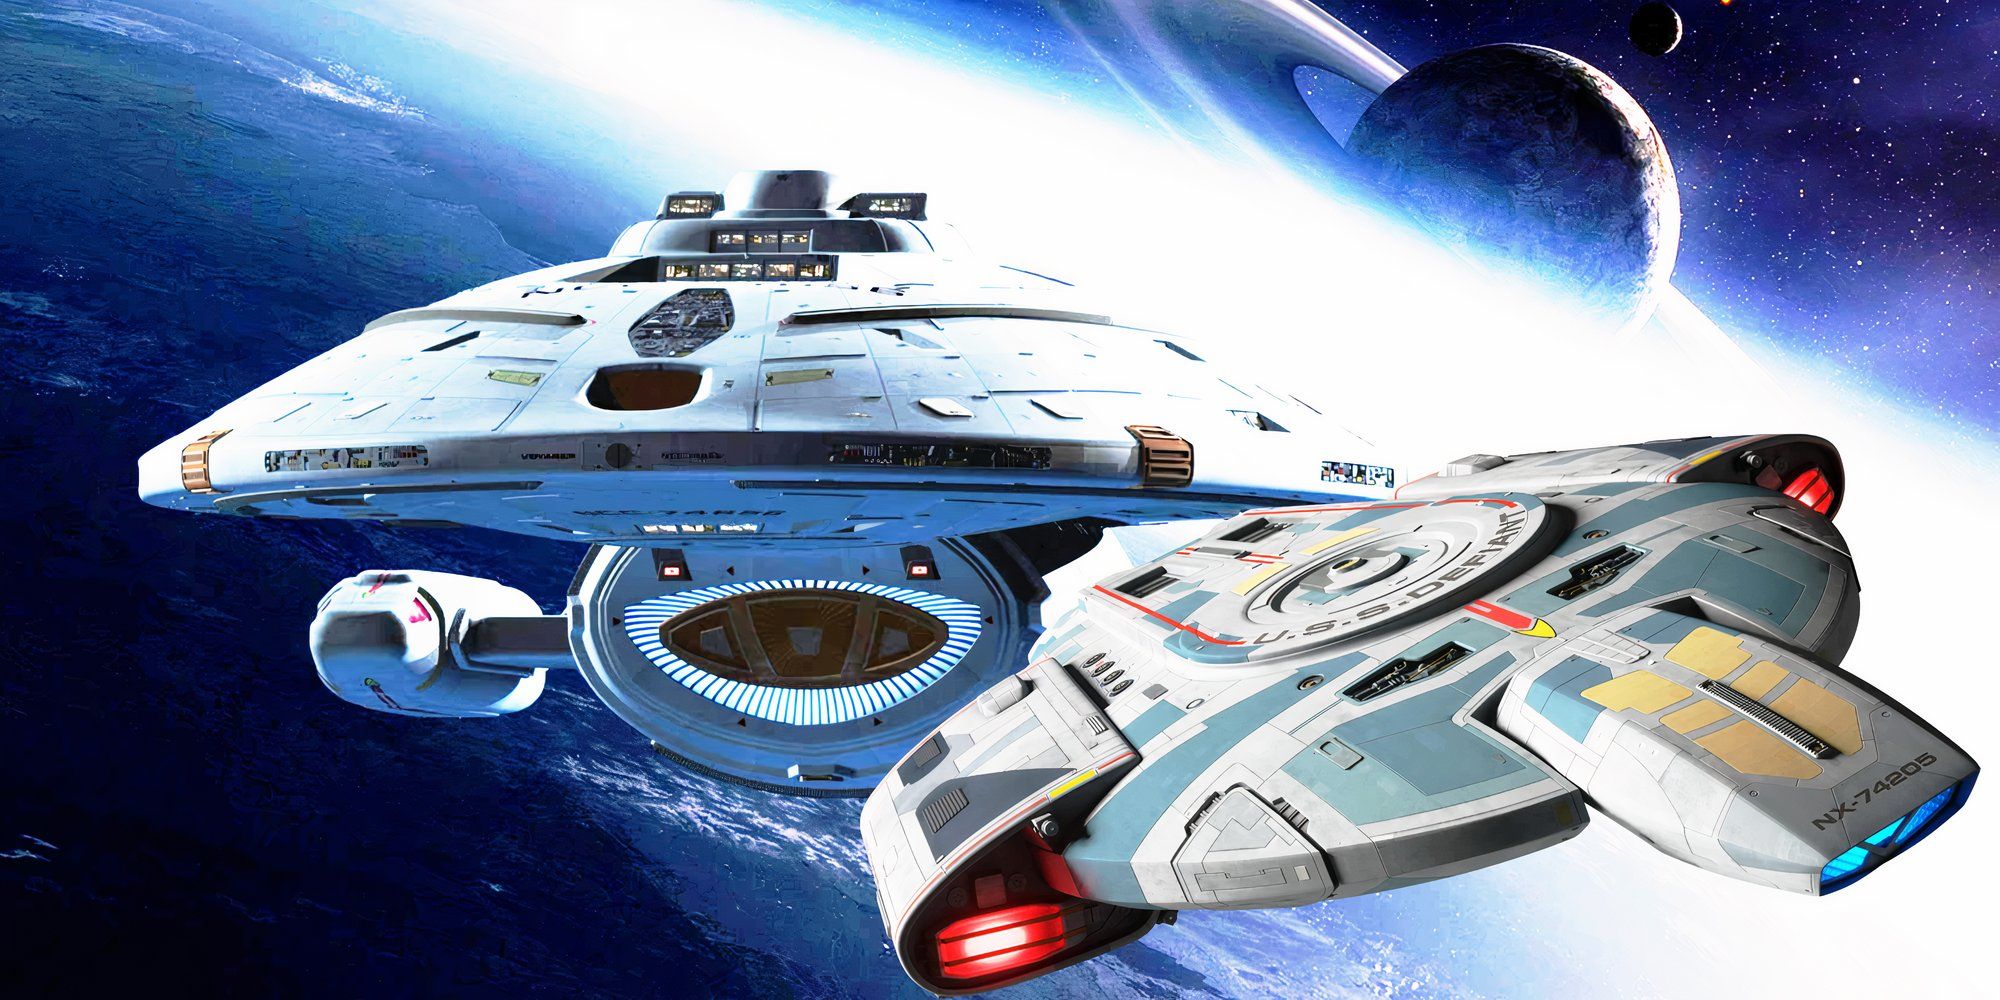 The USS Voyager and USS Defiant from Star Trek